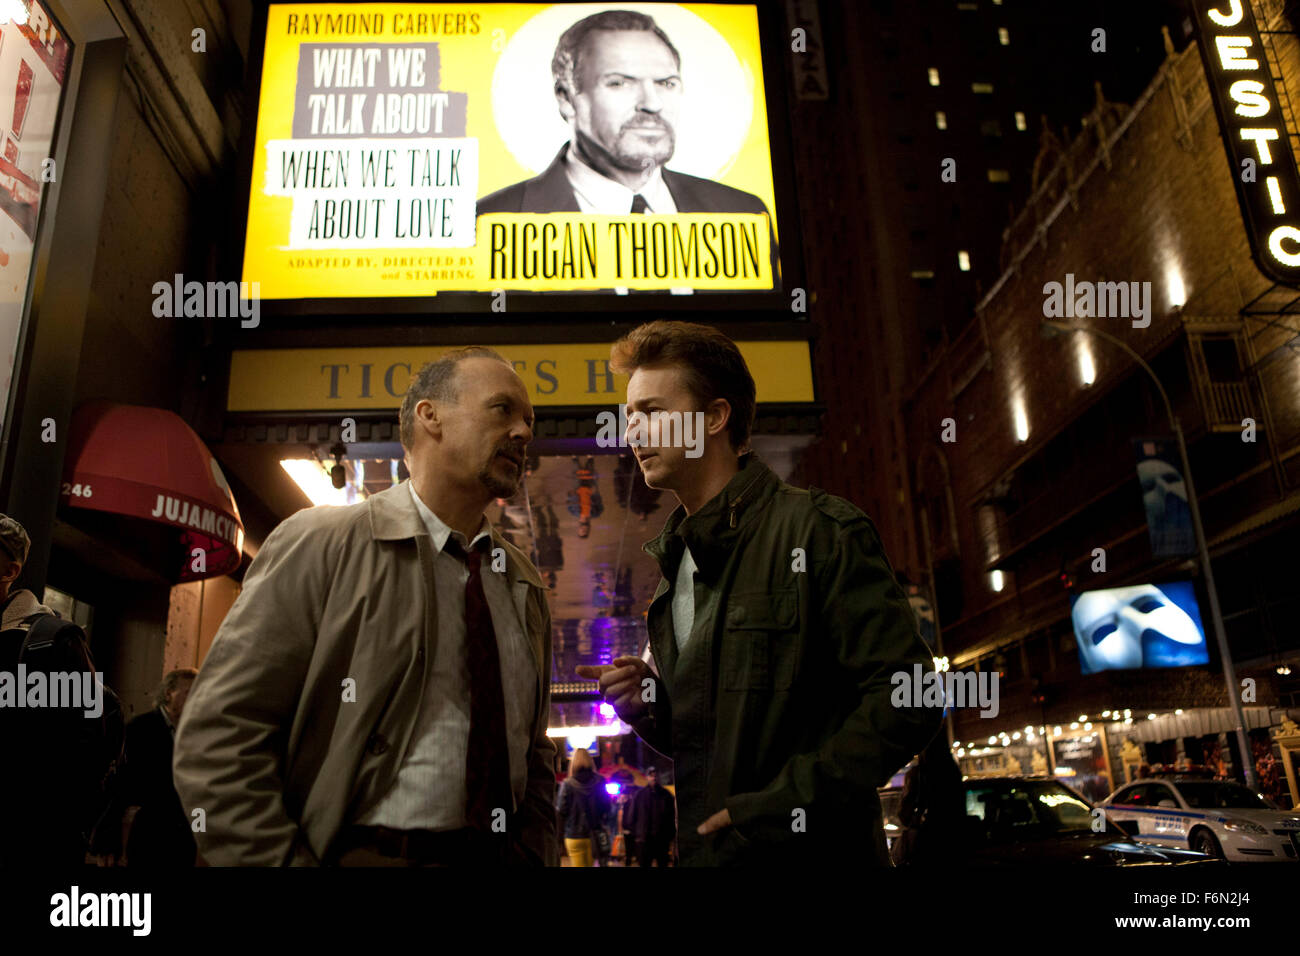 RELEASE DATE: October 17, 2014 TITLE: Birdman STUDIO: Fox Searchlight Films DIRECTOR: Alejandro Gonzalez Inarritu PLOT: A washed-up actor who once played an iconic superhero must overcome his ego and family trouble as he mounts a Broadway play in a bid to reclaim his past glory PICTURED: MICHAEL KEATON as Riggan Thomson and EDWARD NORTON  (Credit: c Fox Searchlight Films/Entertainment Pictures) Stock Photo